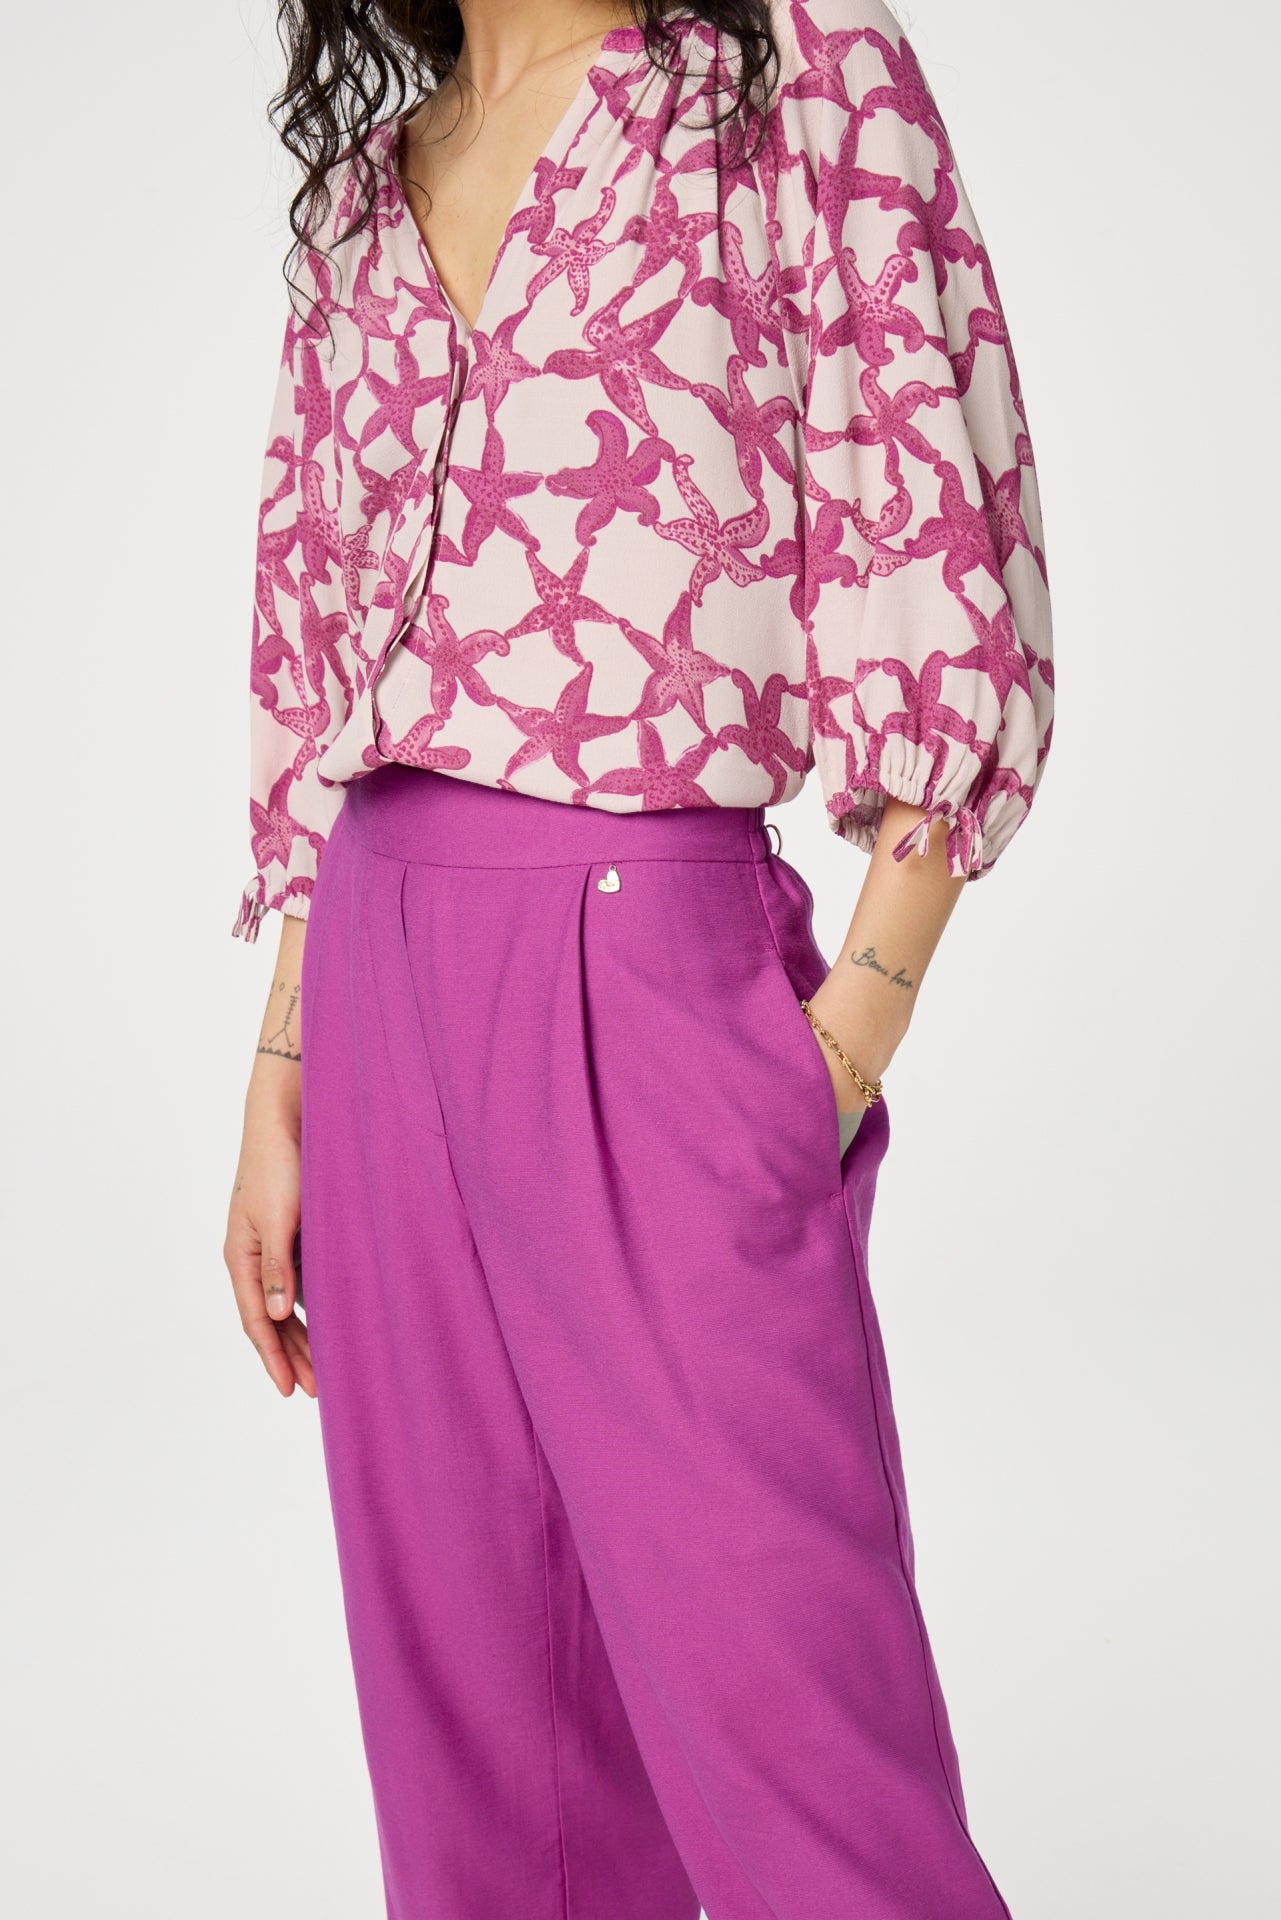 Neale Trousers | Pink Punch